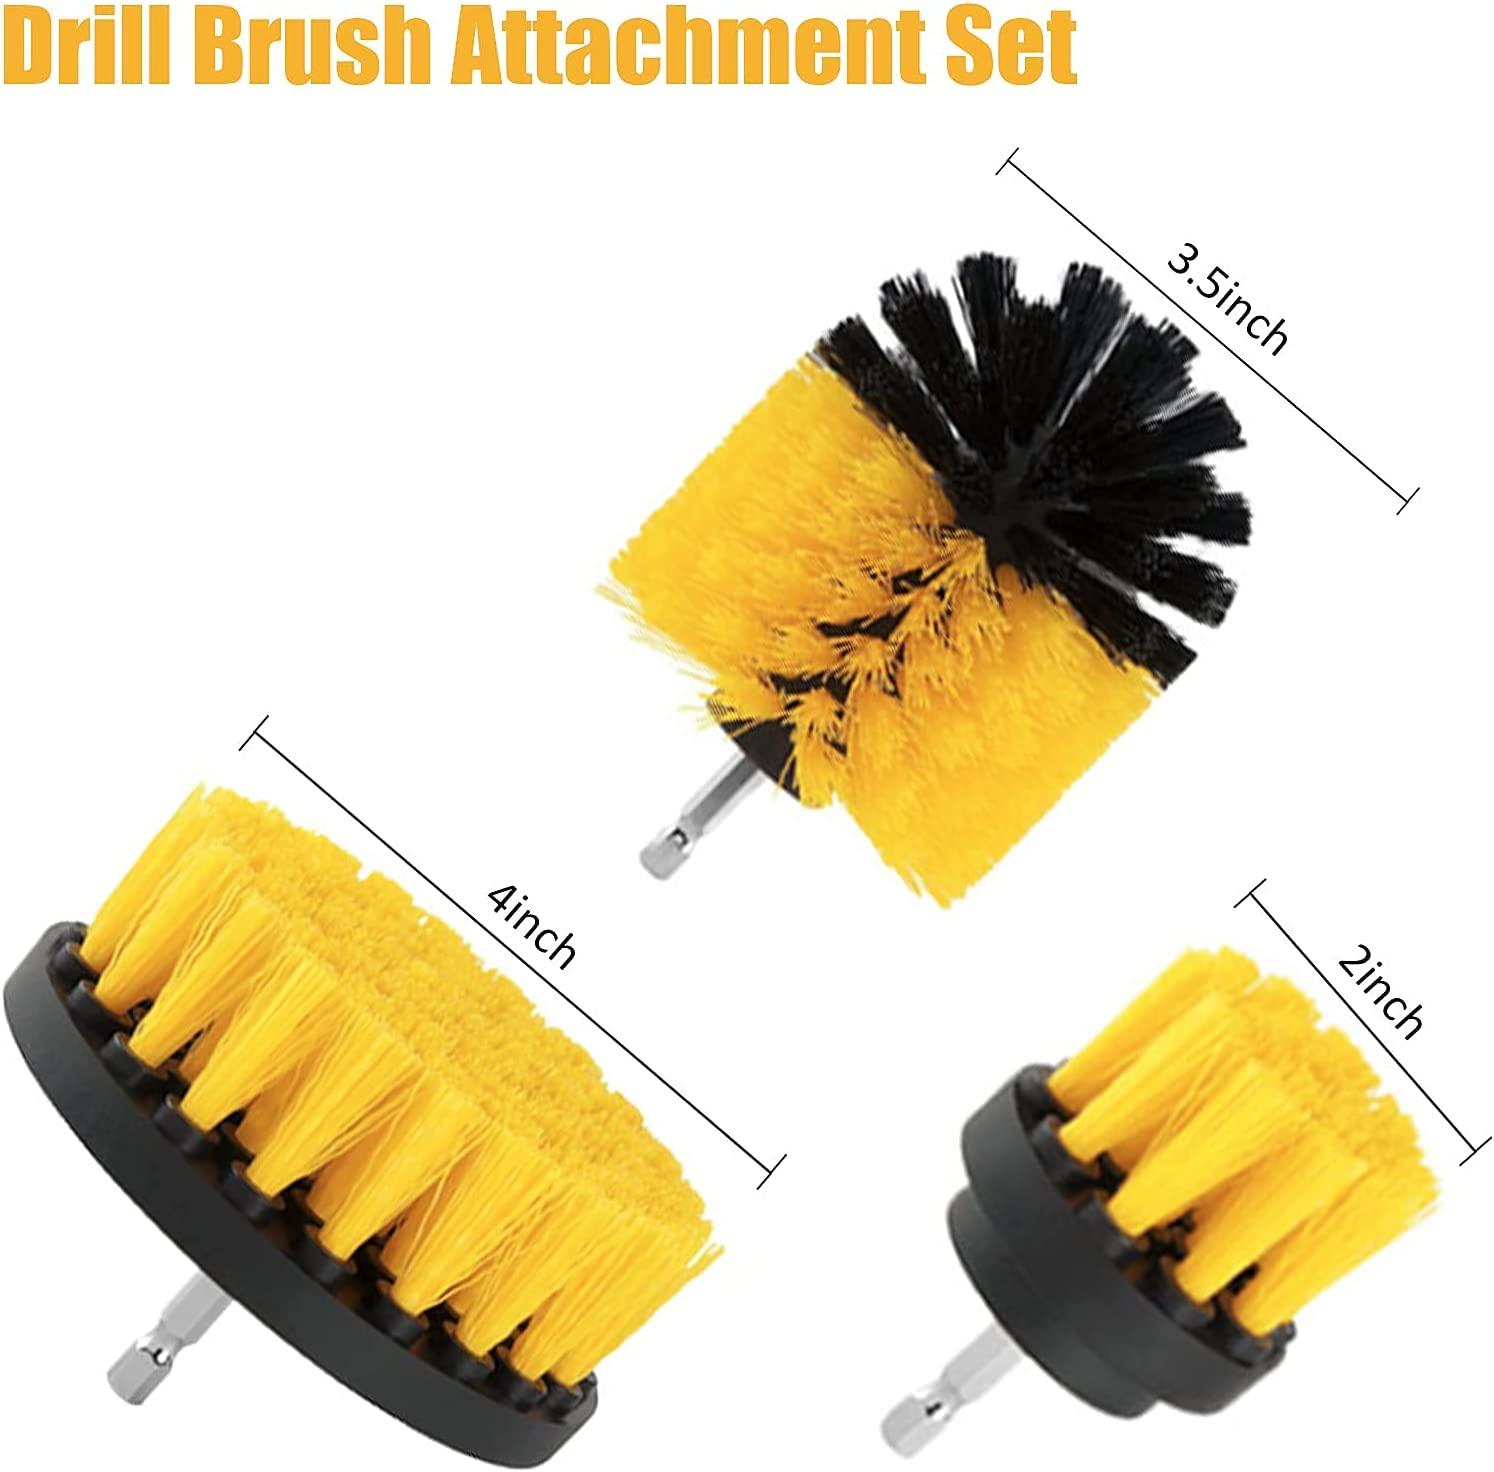 3 Pack Drill Brush Attachment Scrubber Brushes Set Kit with